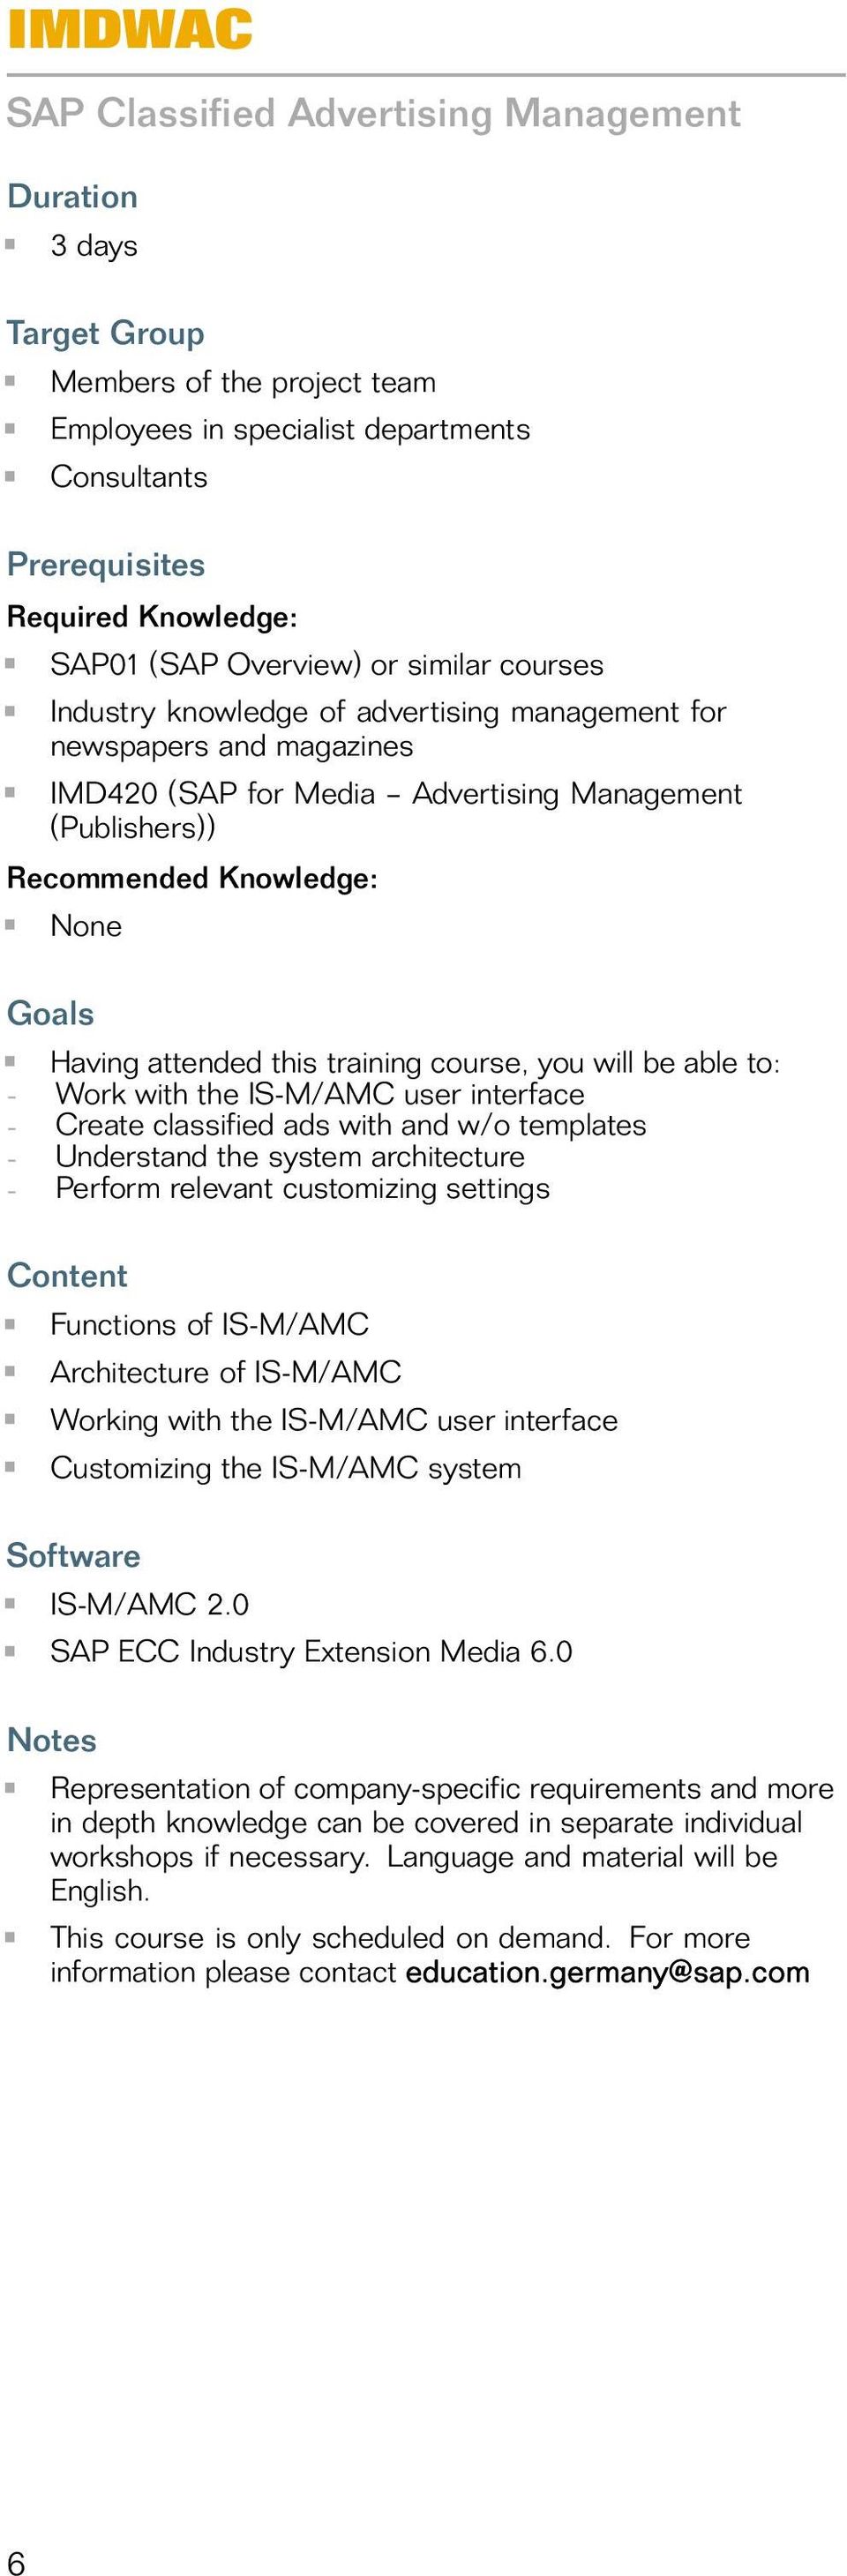 architecture - Perform relevant customizing settings Functions of IS-M/AMC Architecture of IS-M/AMC Working with the IS-M/AMC user interface Customizing the IS-M/AMC system IS-M/AMC 2.